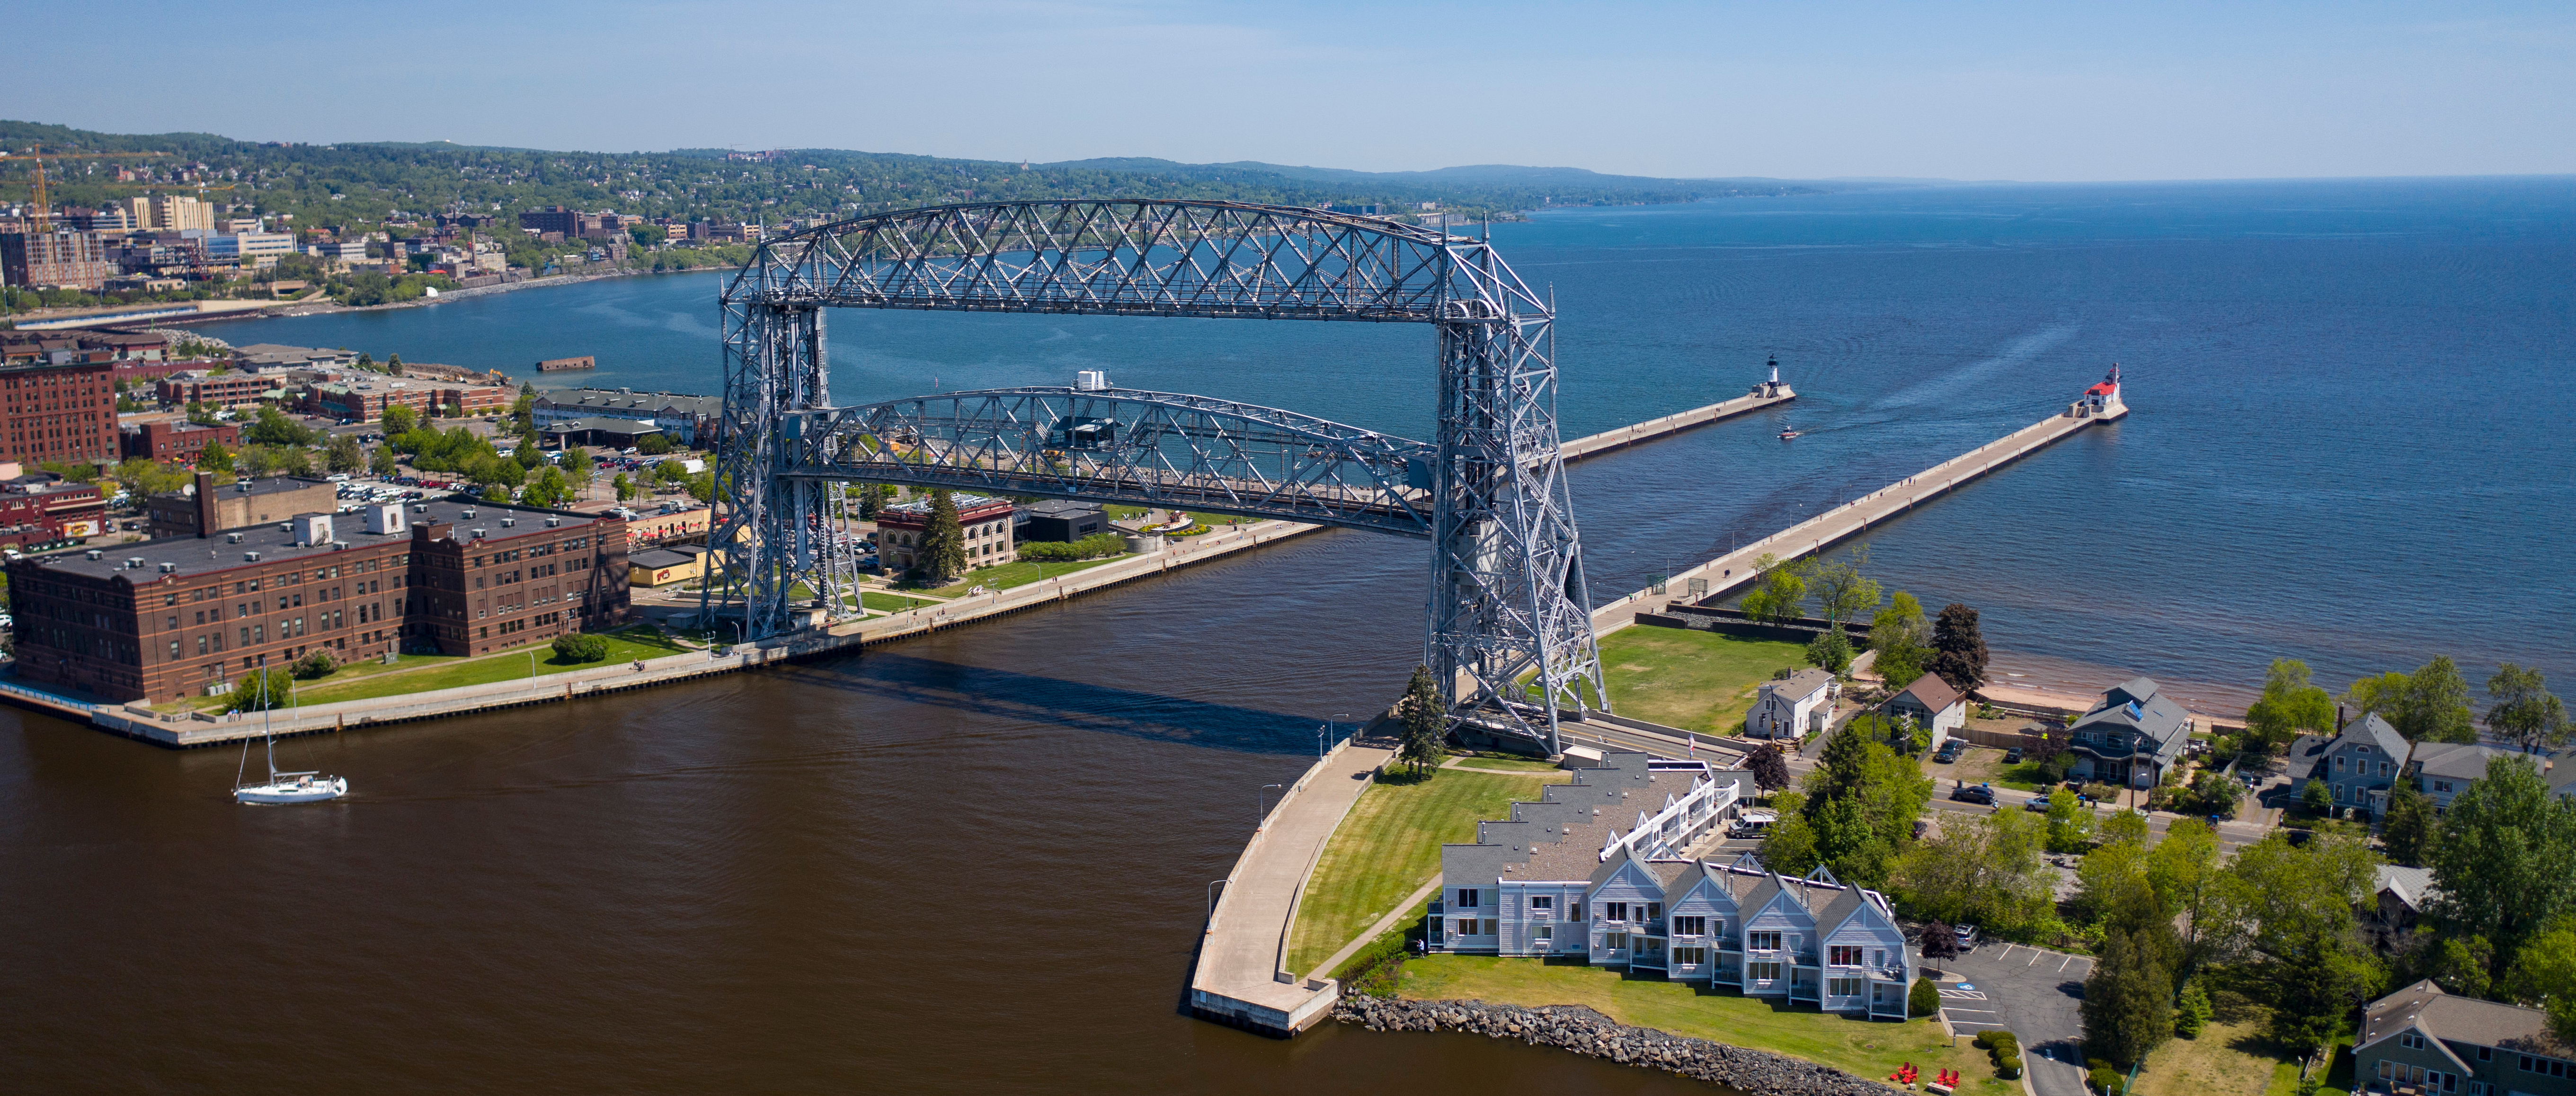 Duluth's Lift Bridge in day time